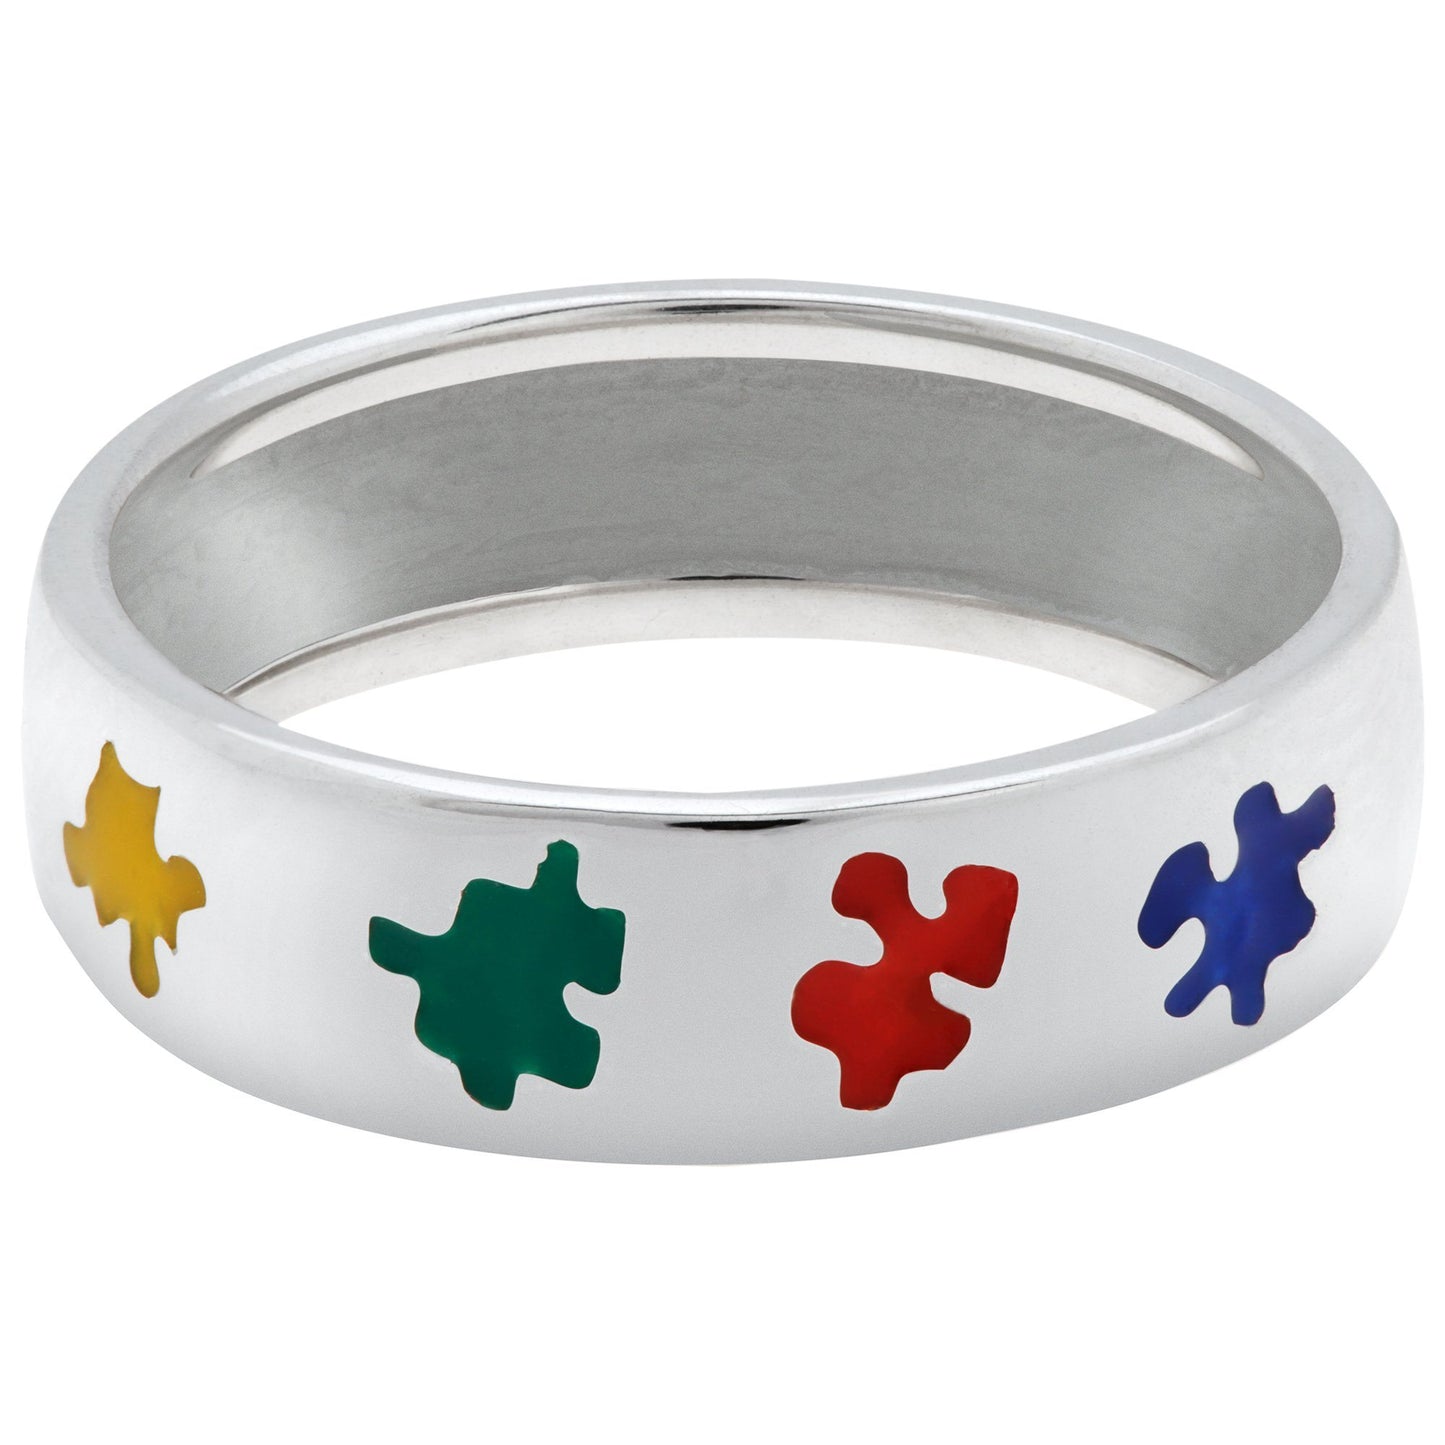 Puzzle Piece Autism Awareness Sterling Ring